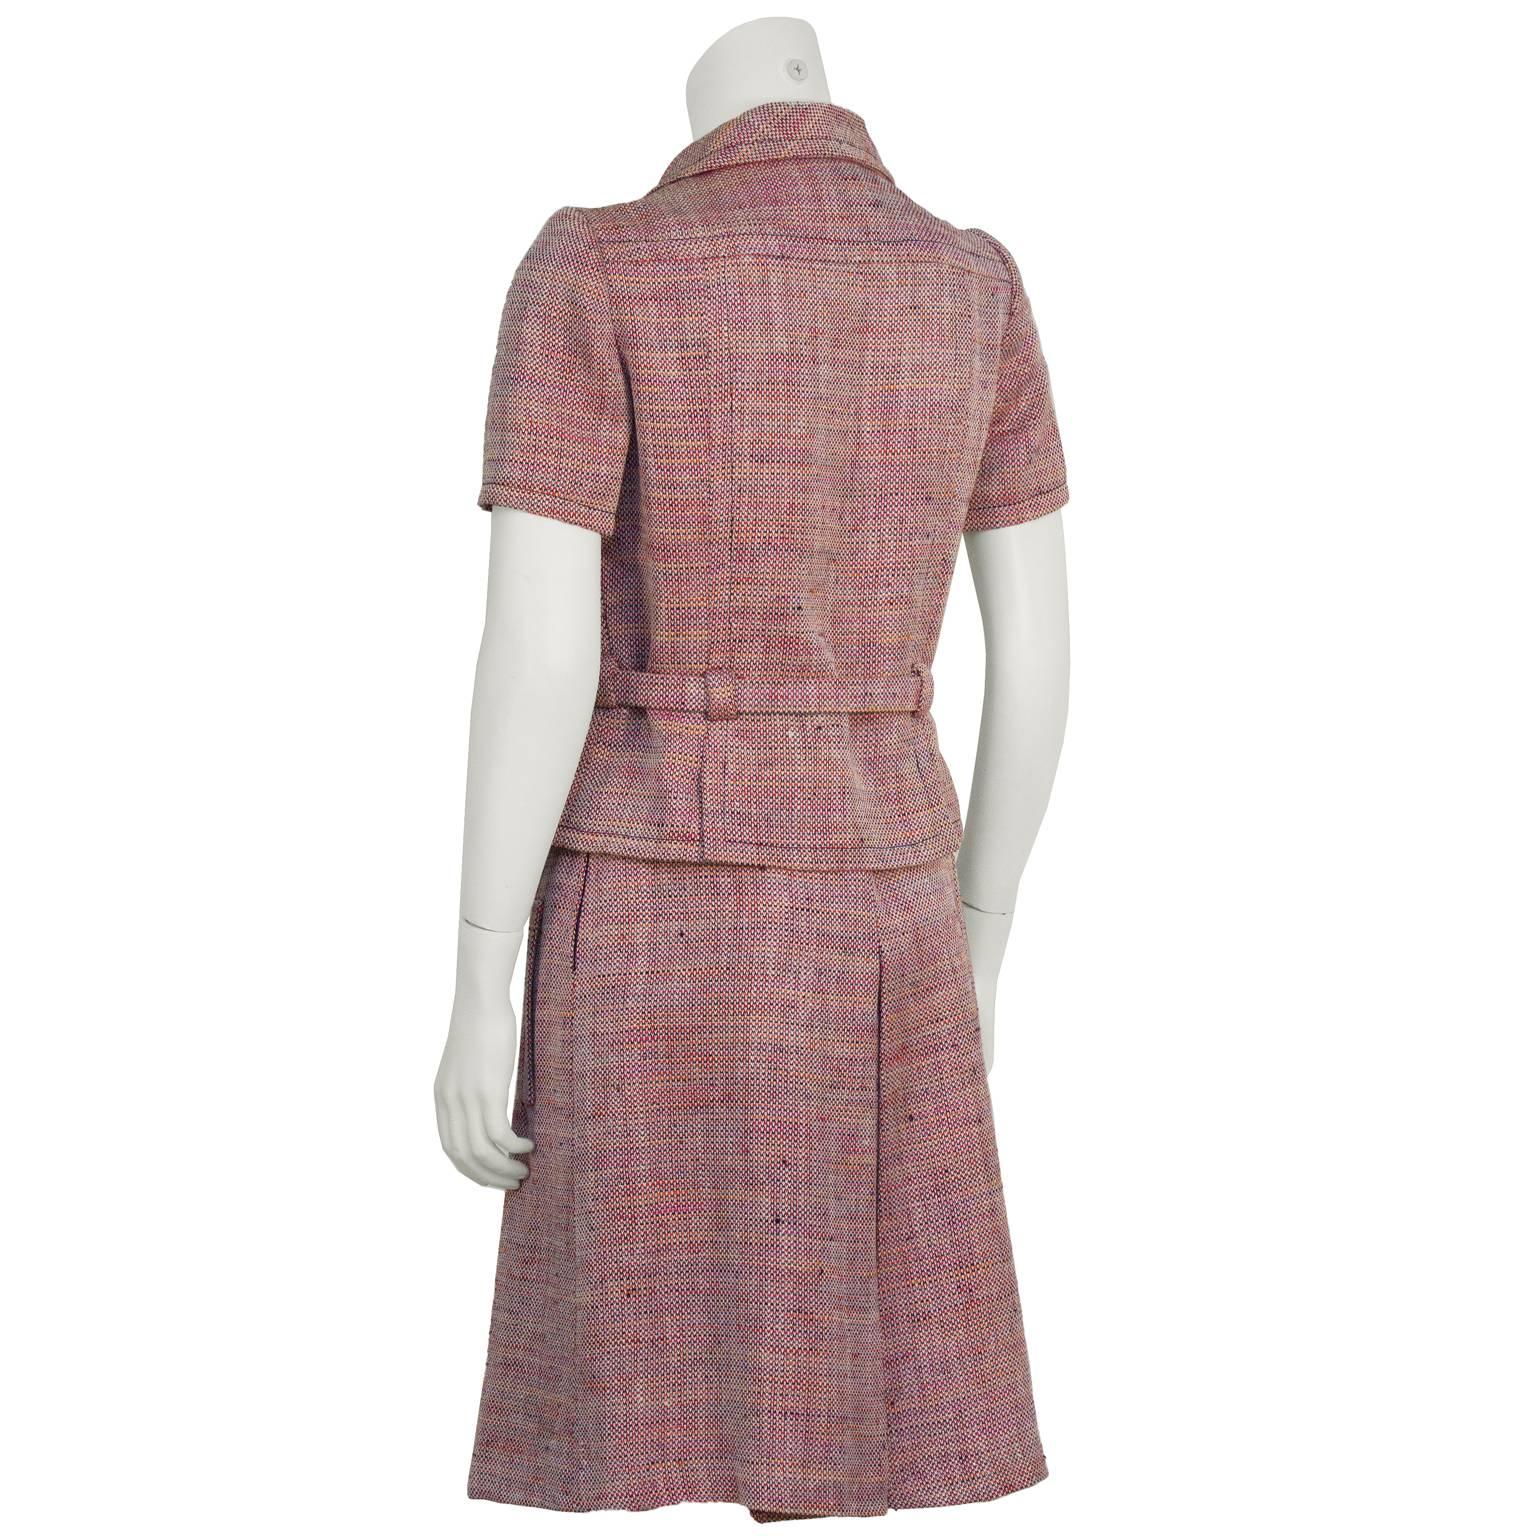 1960’s Guy LaRoche red, pink, orange and blue rayon tweed short sleeved skirt suit. The jacket features a fully adjustable belt at the waist with pewter metal buttons down the front. Skirt has an inverted pleat on the front and back and two banded